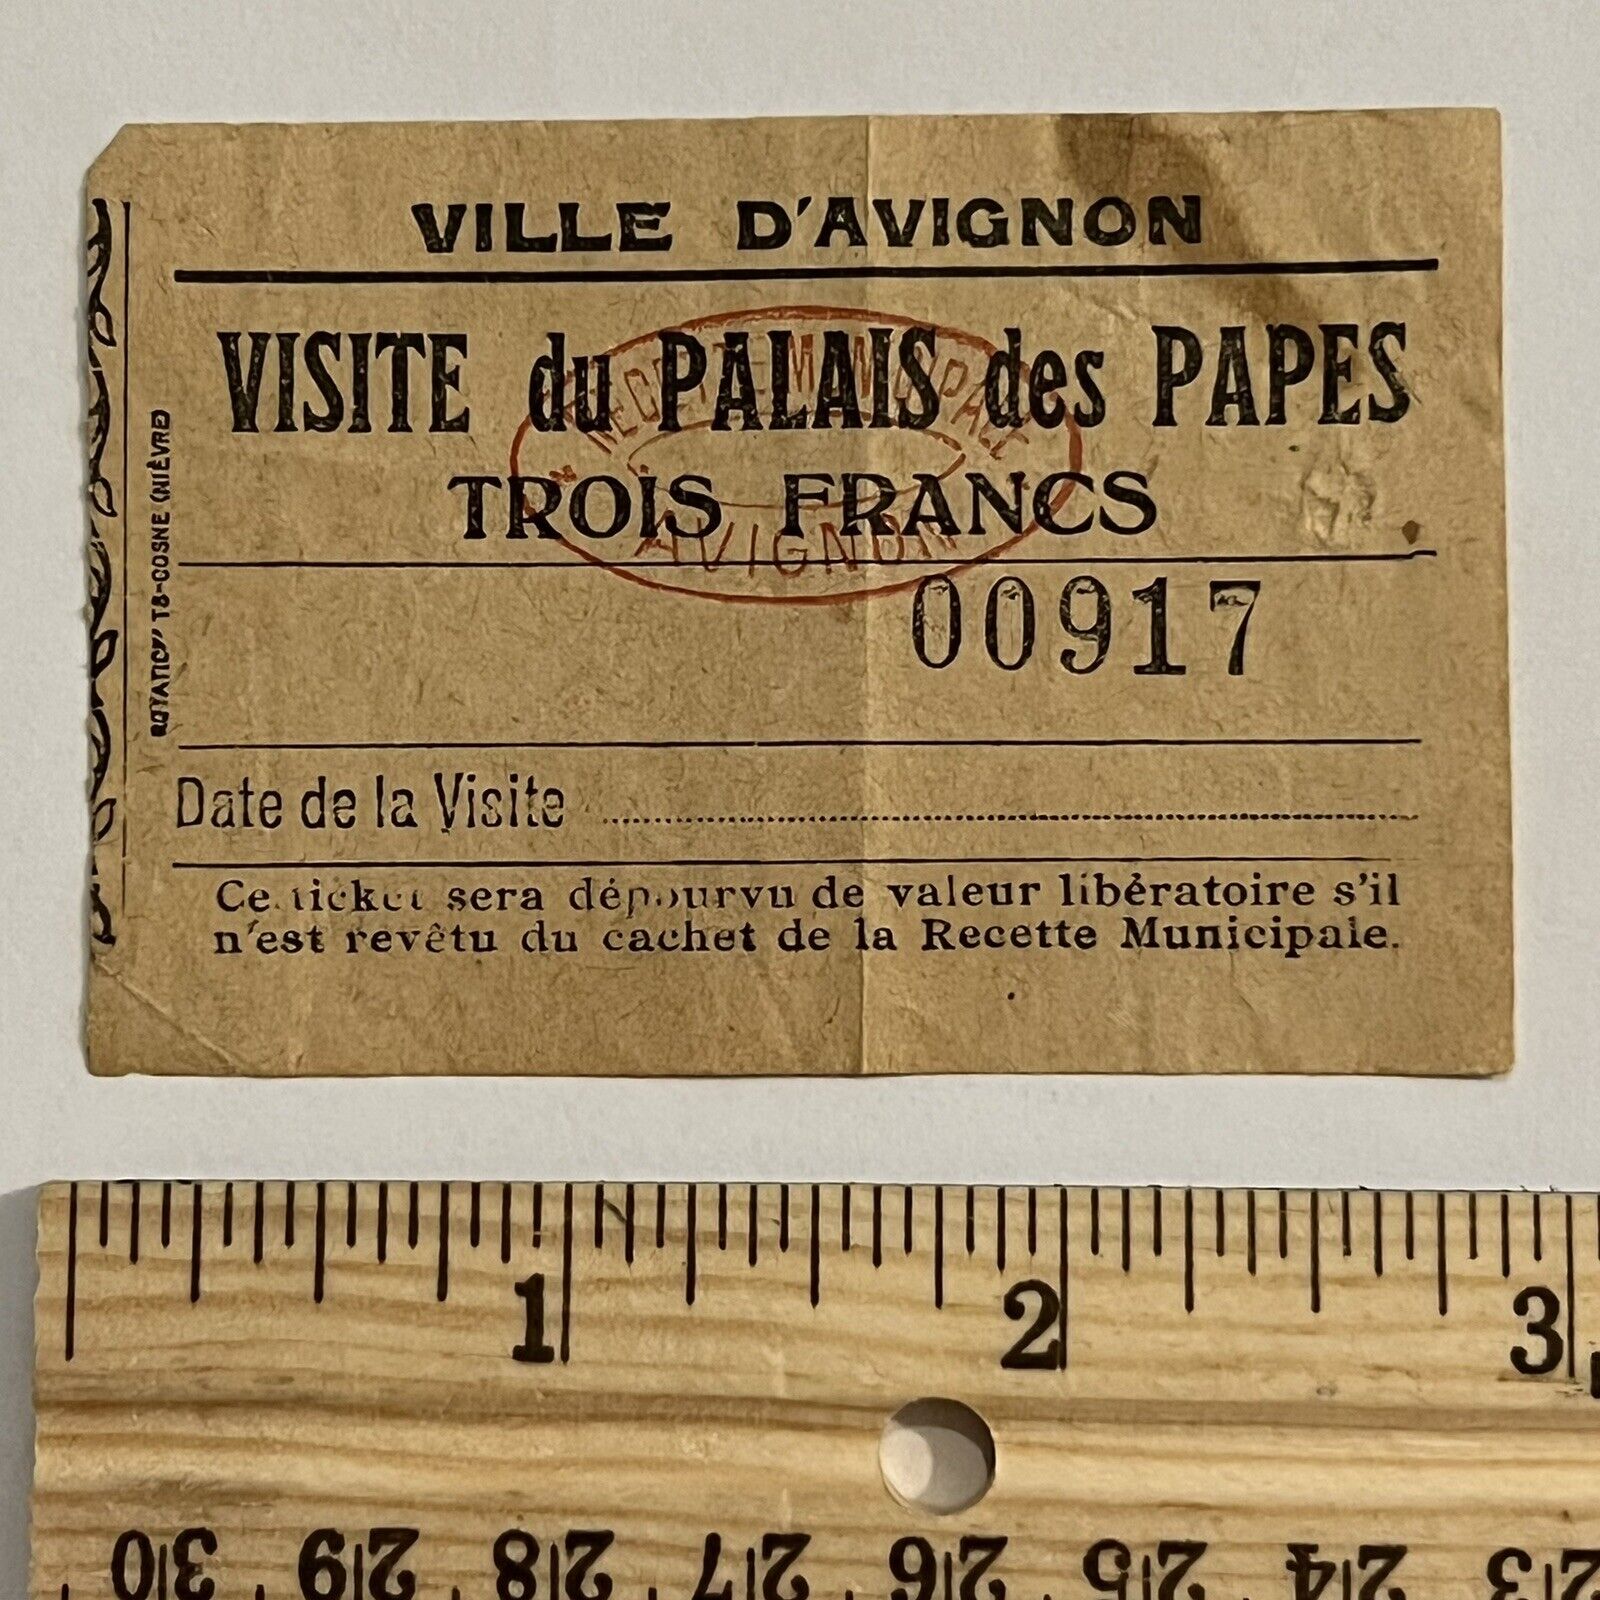 ANTIQUE USED TICKET TO THE PALAIS DES PAPES POPE'S PALACE IN AVIGNON #00917